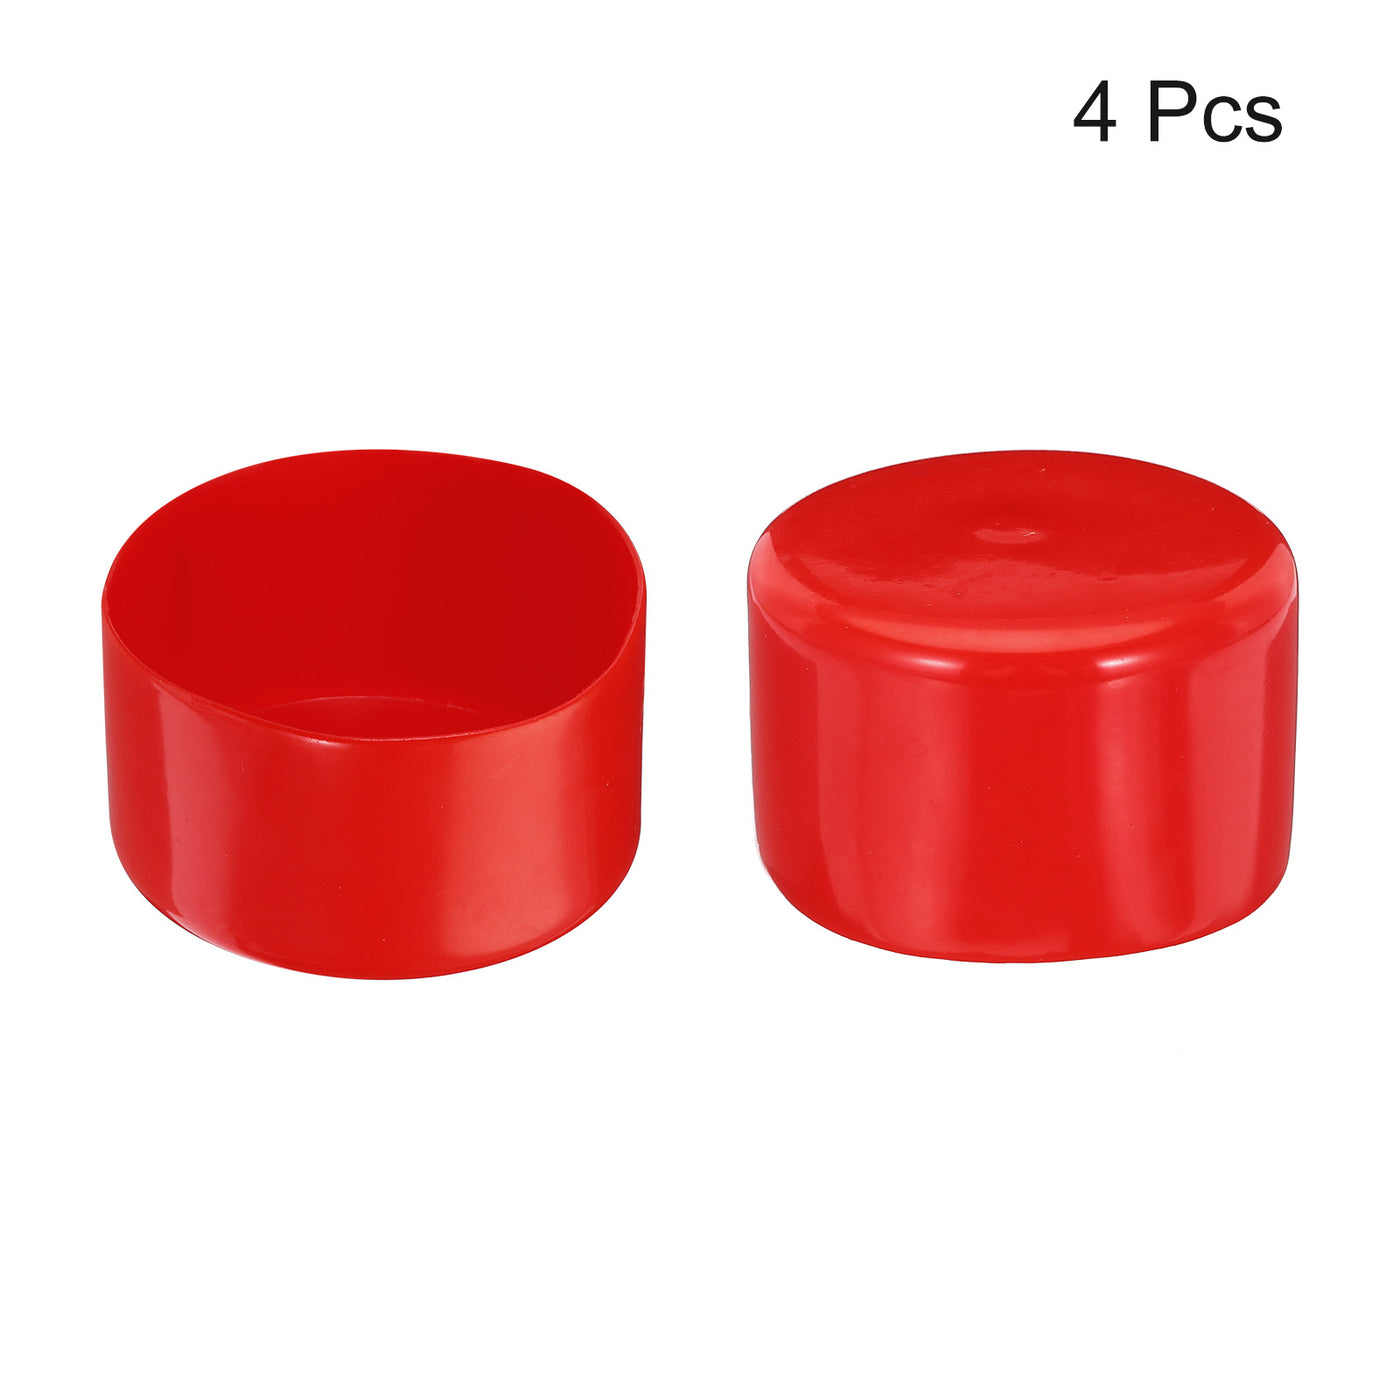 uxcell Uxcell 4pcs Rubber End Caps 70mm ID Vinyl Round Tube Bolt Cap Cover Screw Thread Protectors Red